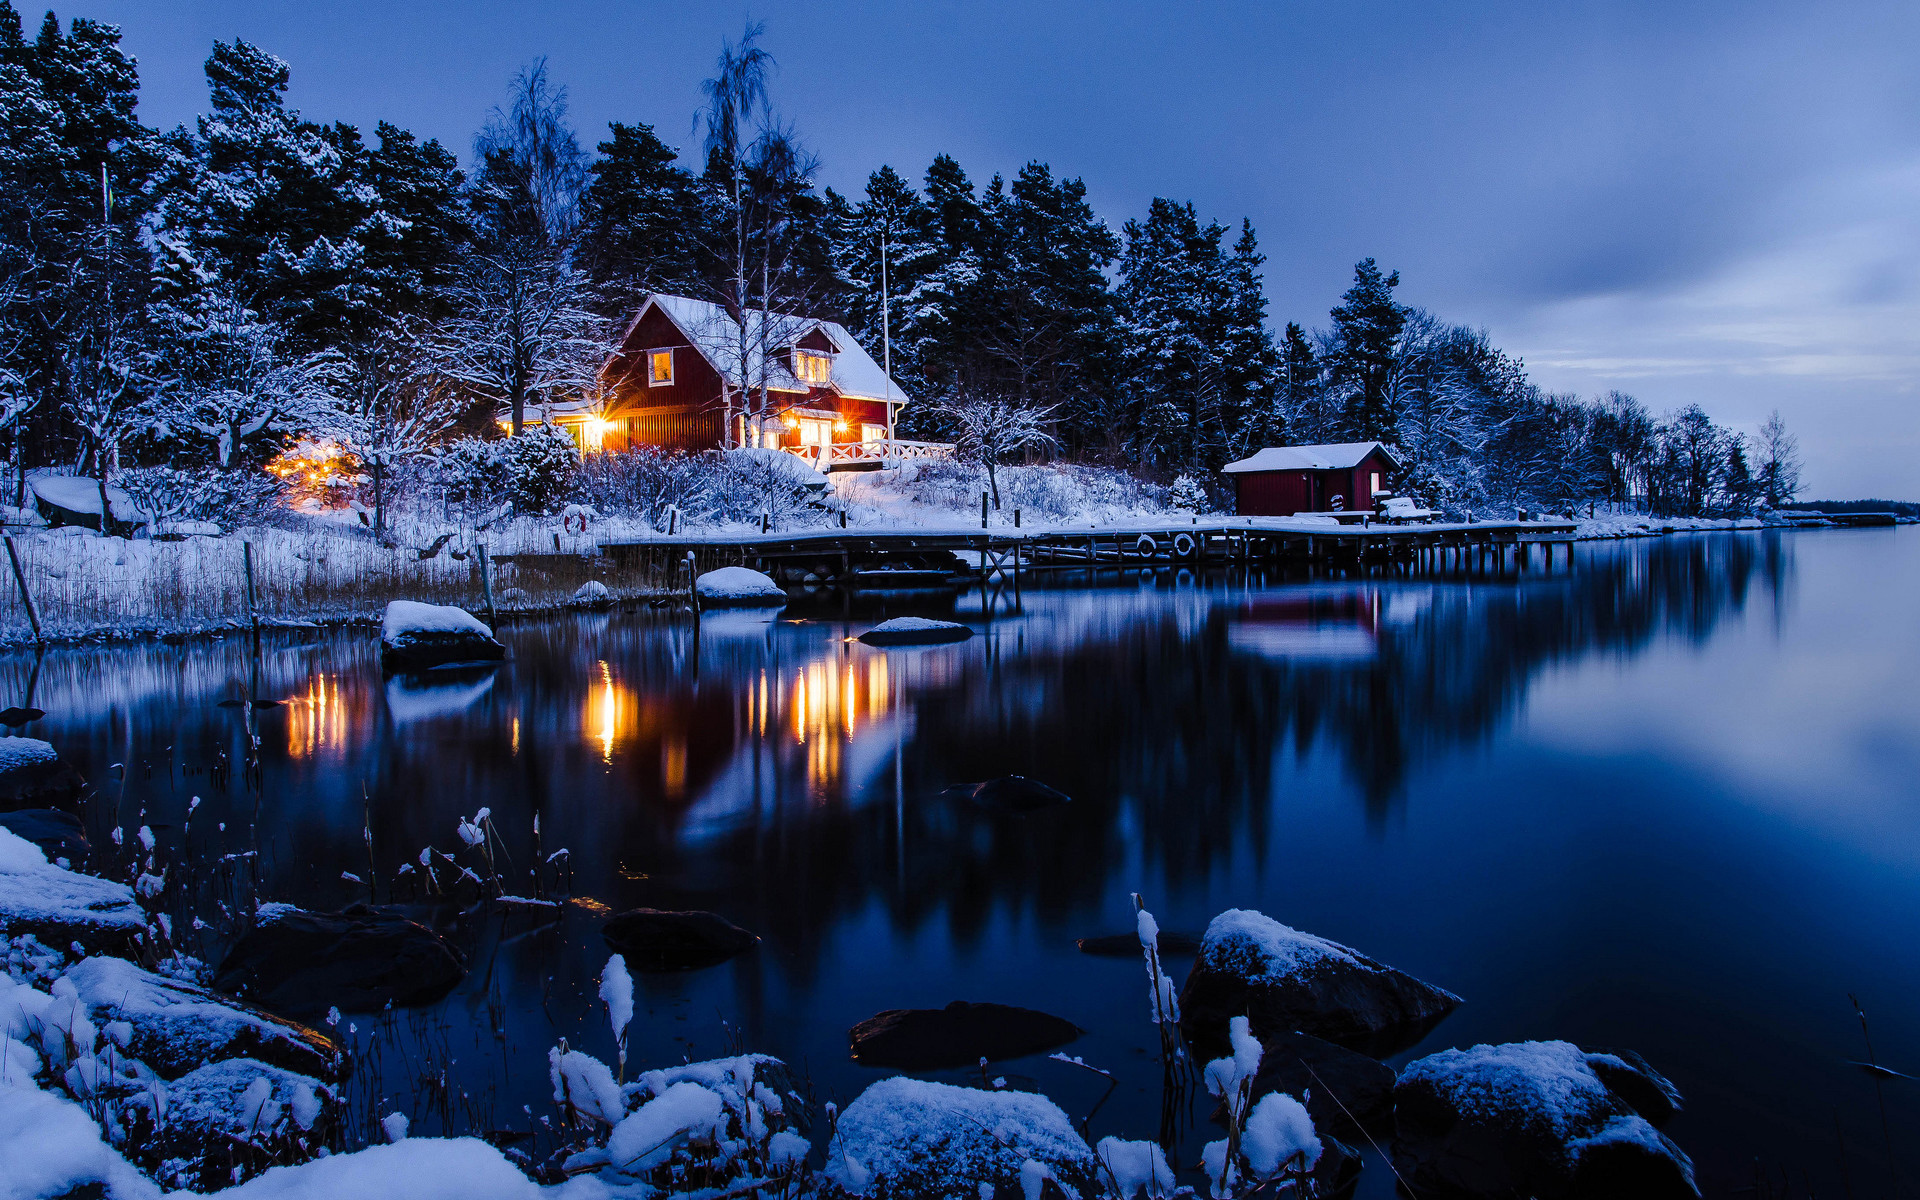 Beautiful Winter Wallpapers 60 Images